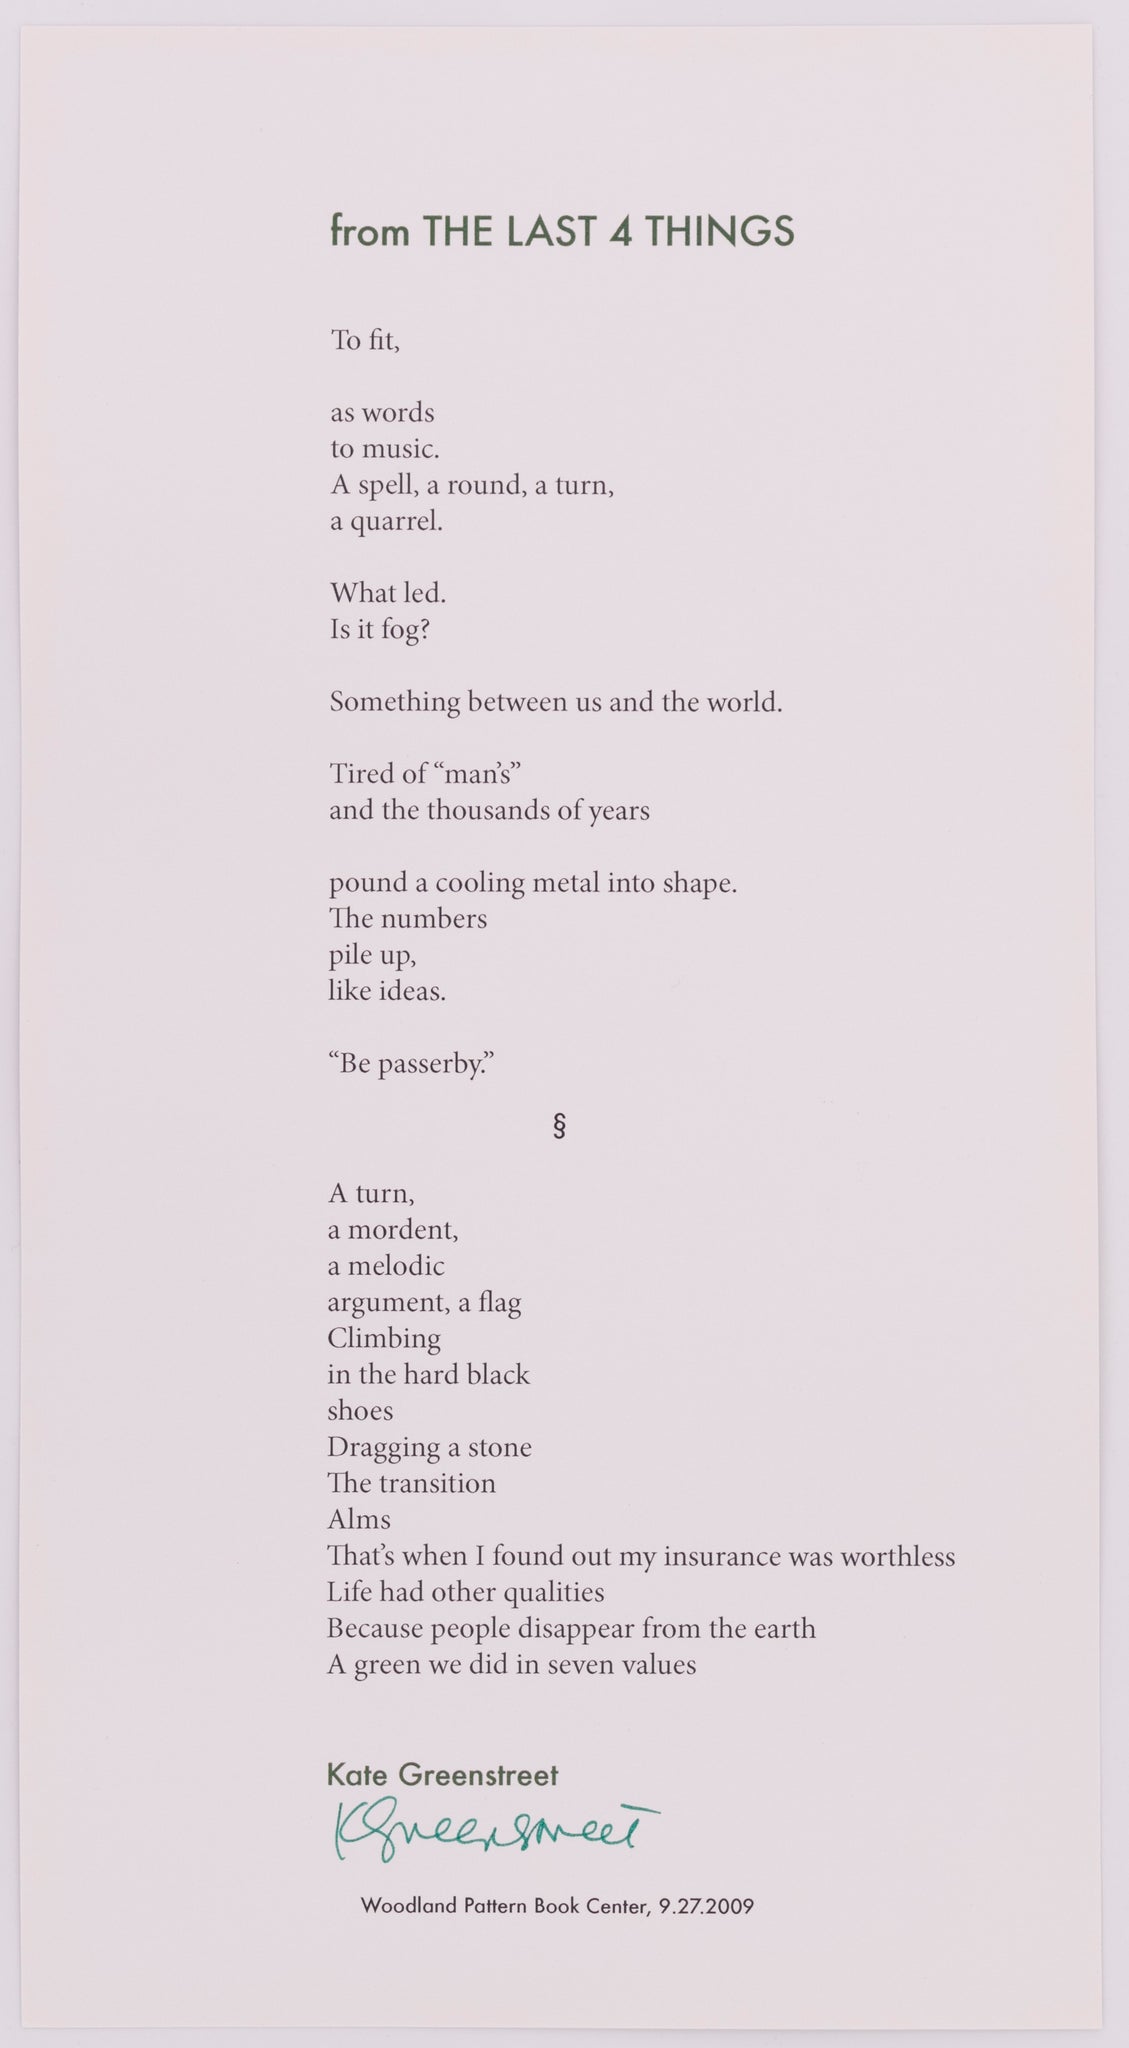 Broadside by Kate Greenstreet titled from the last 4 things. Black text on blueish grey paper.